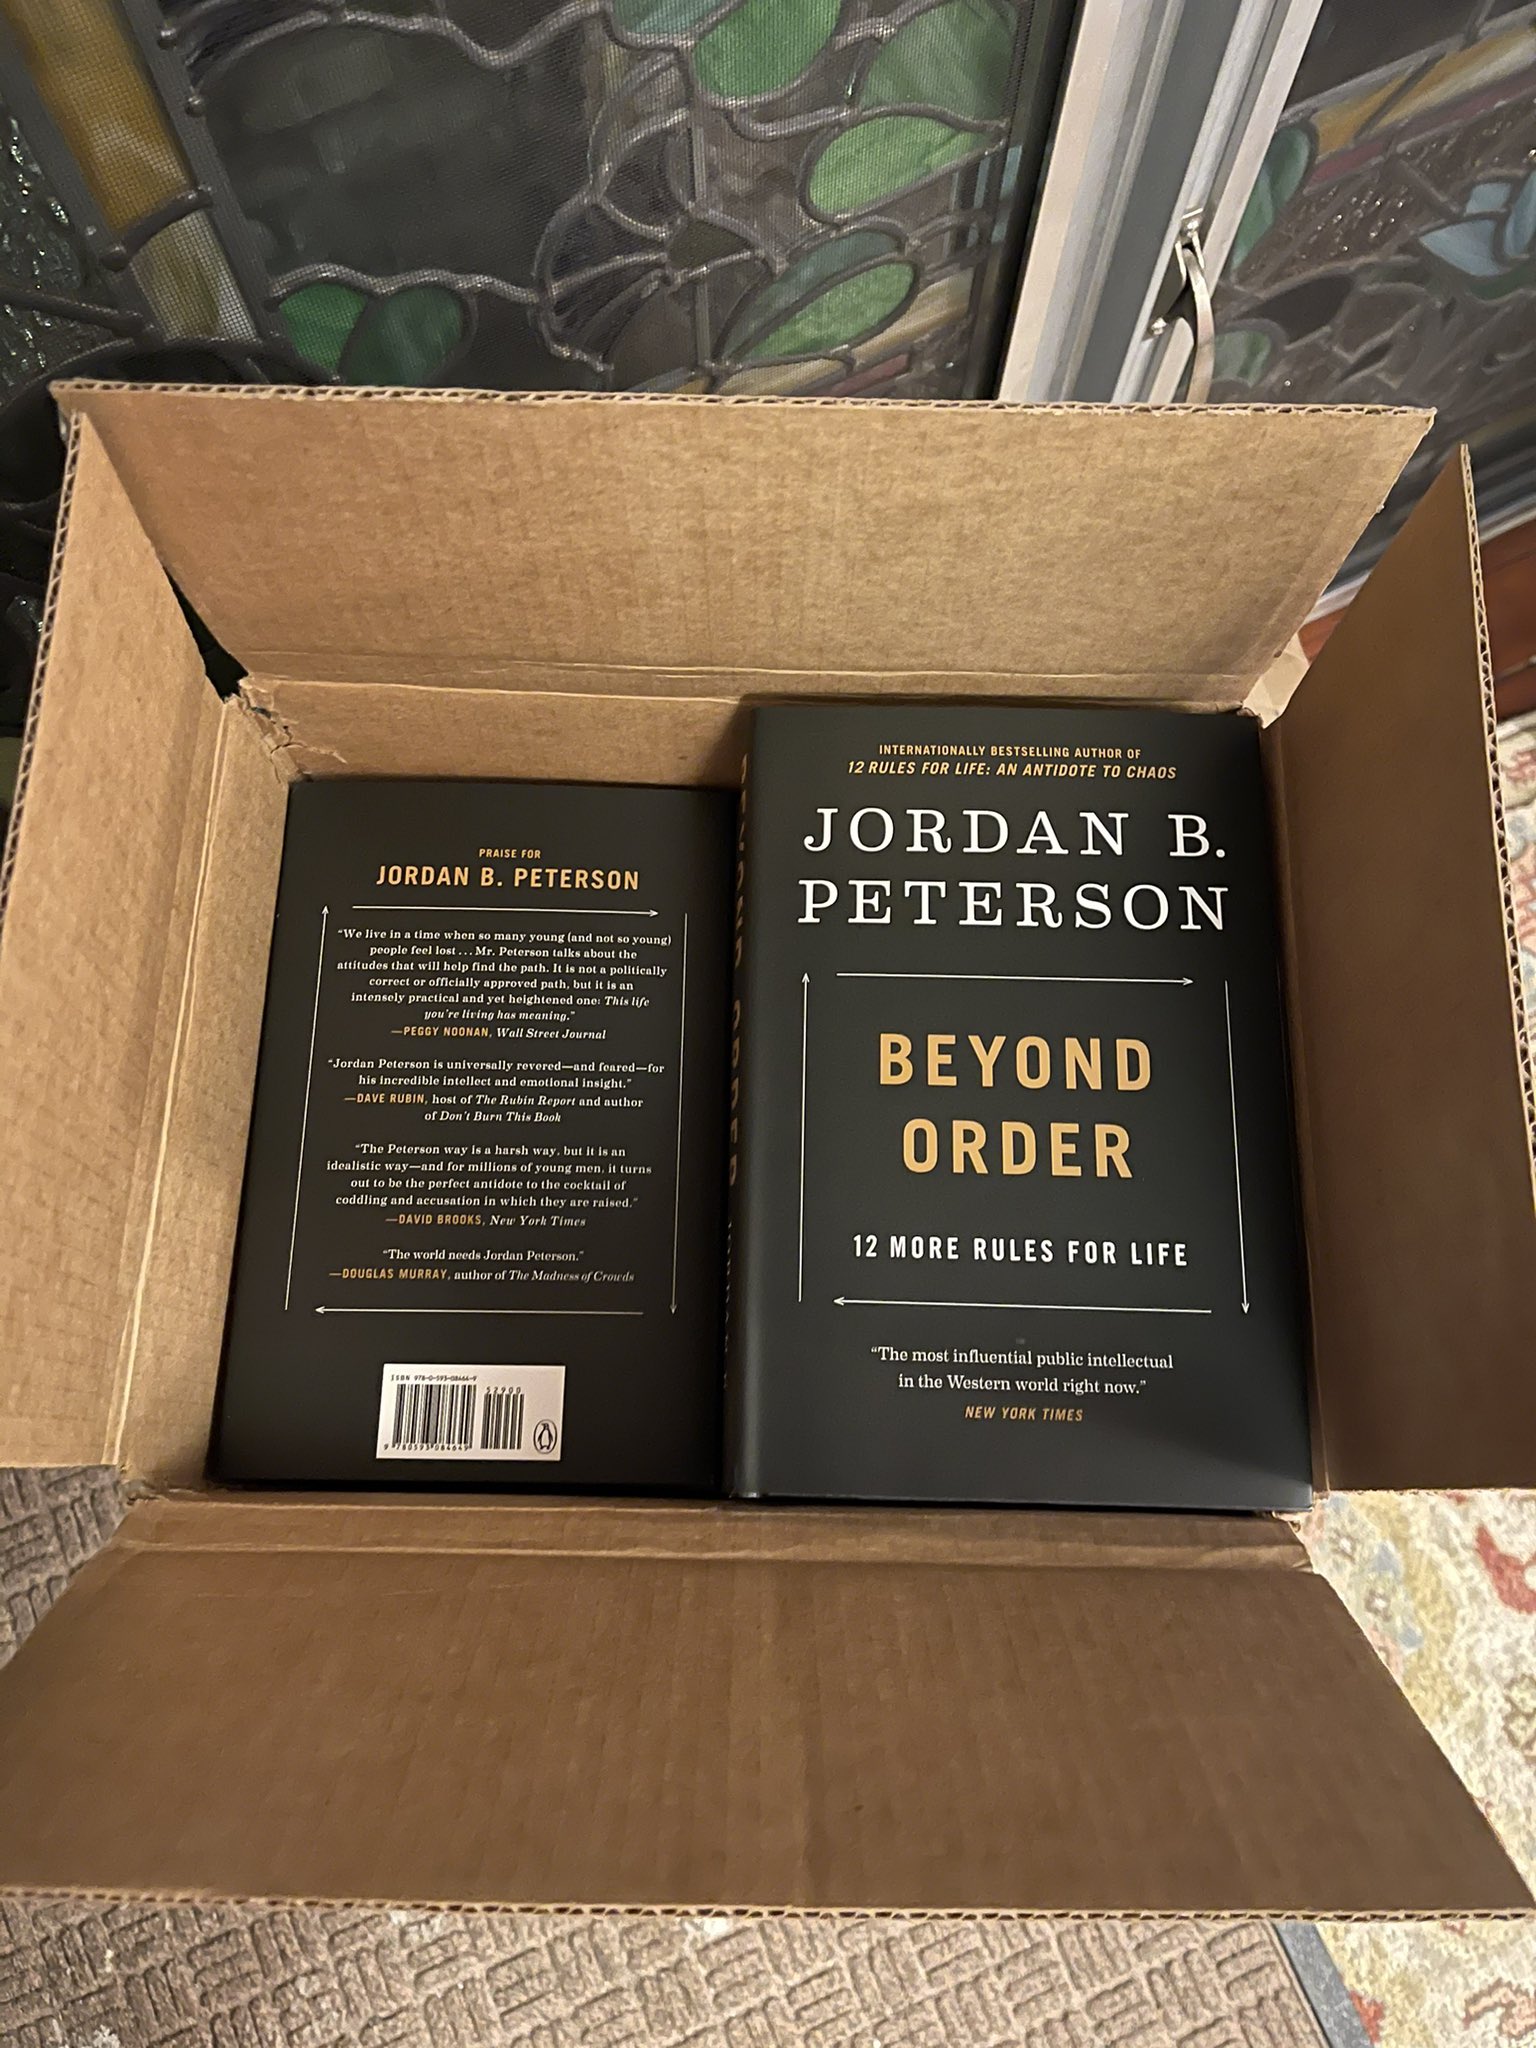 Dr Jordan B Peterson on X: "First copies of my new book. It looks good. I  hope it is good. I can't tell...https://t.co/teqtuP5RRg  https://t.co/cwXbWfpTjd" / X